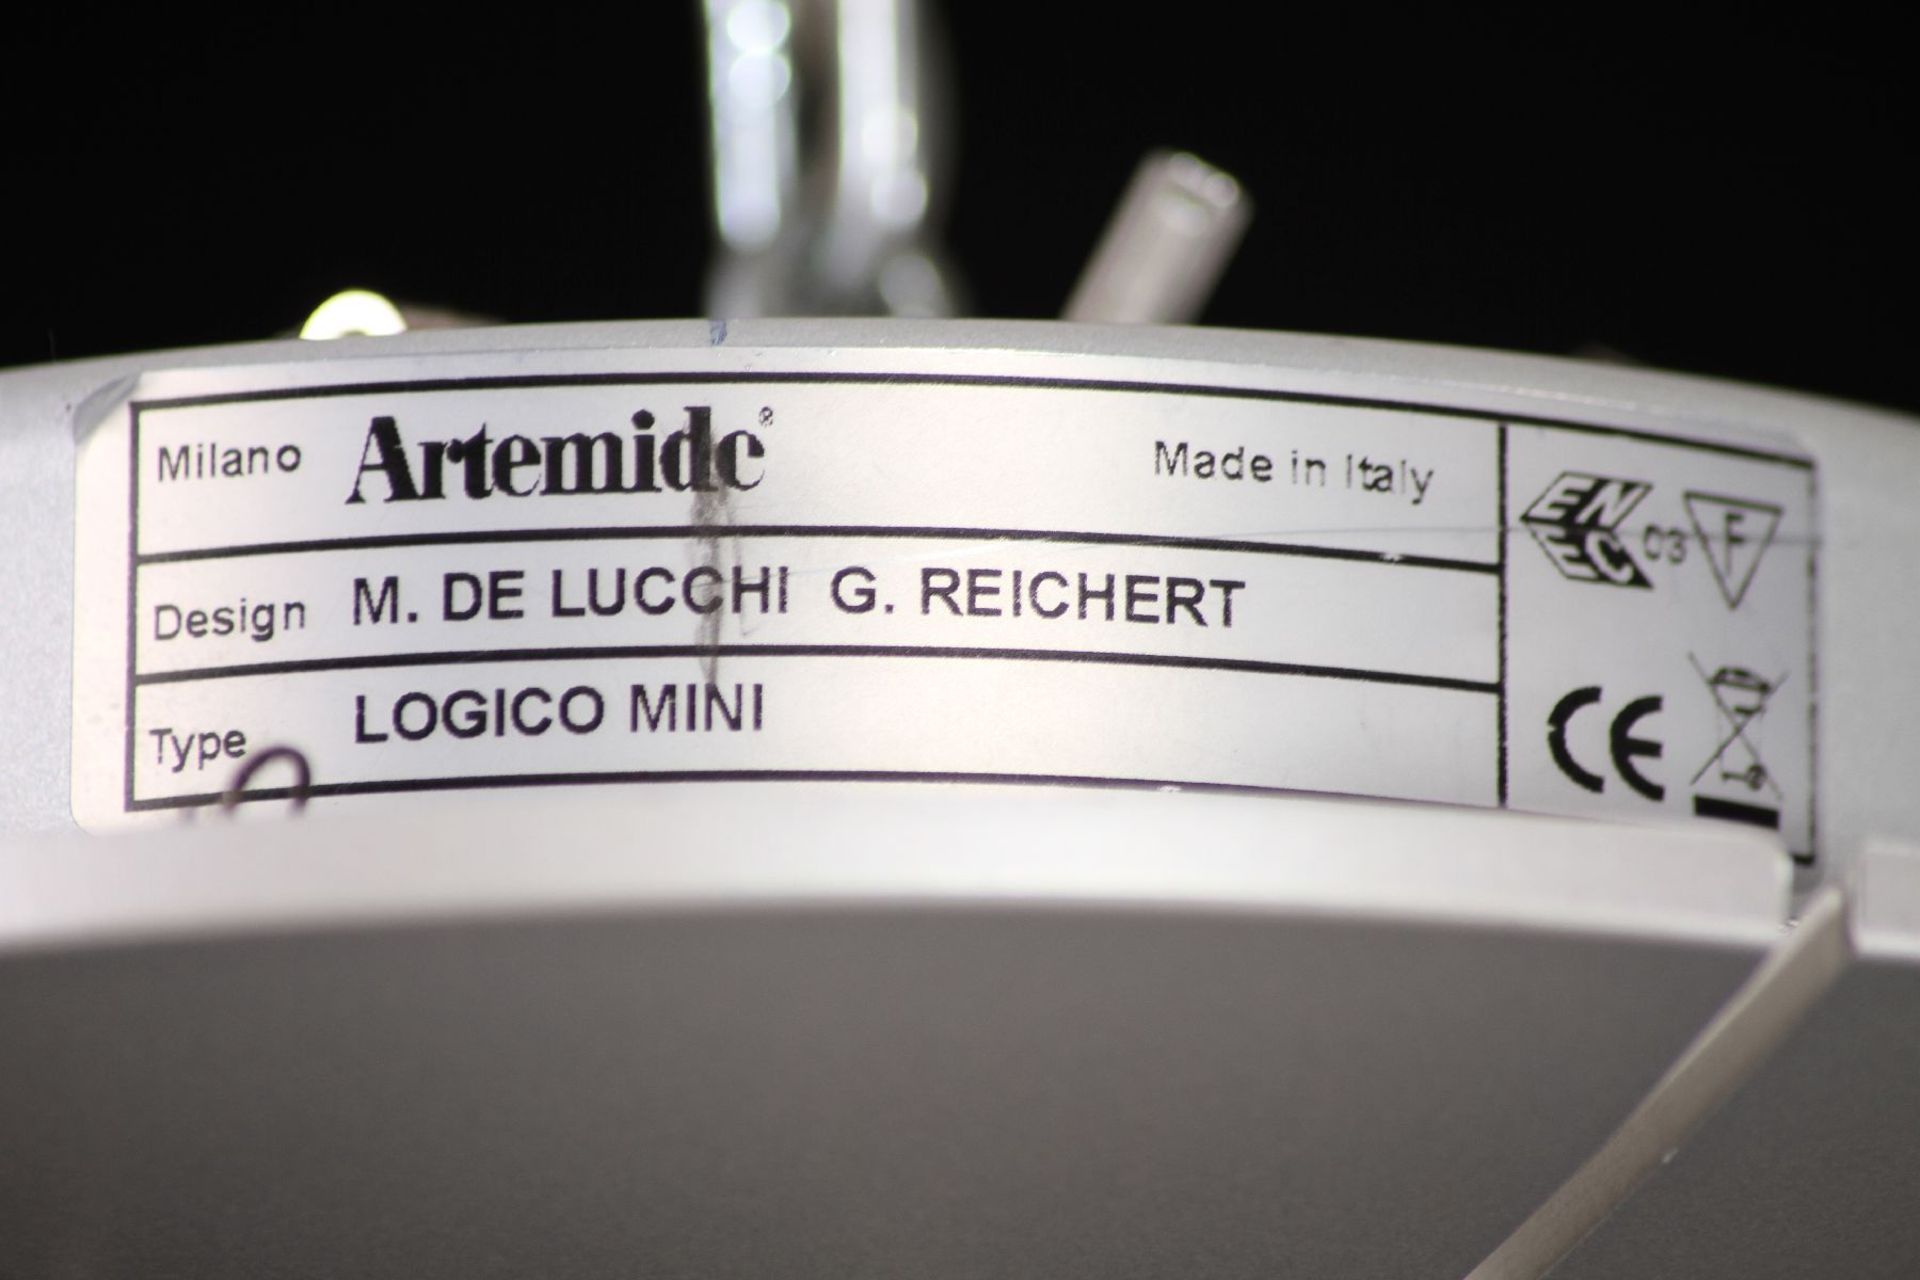 Ceiling Lamp "Artemide" Logico Mini, each 3 lampshades made of glass, hight can be changed, 3 - Bild 4 aus 4